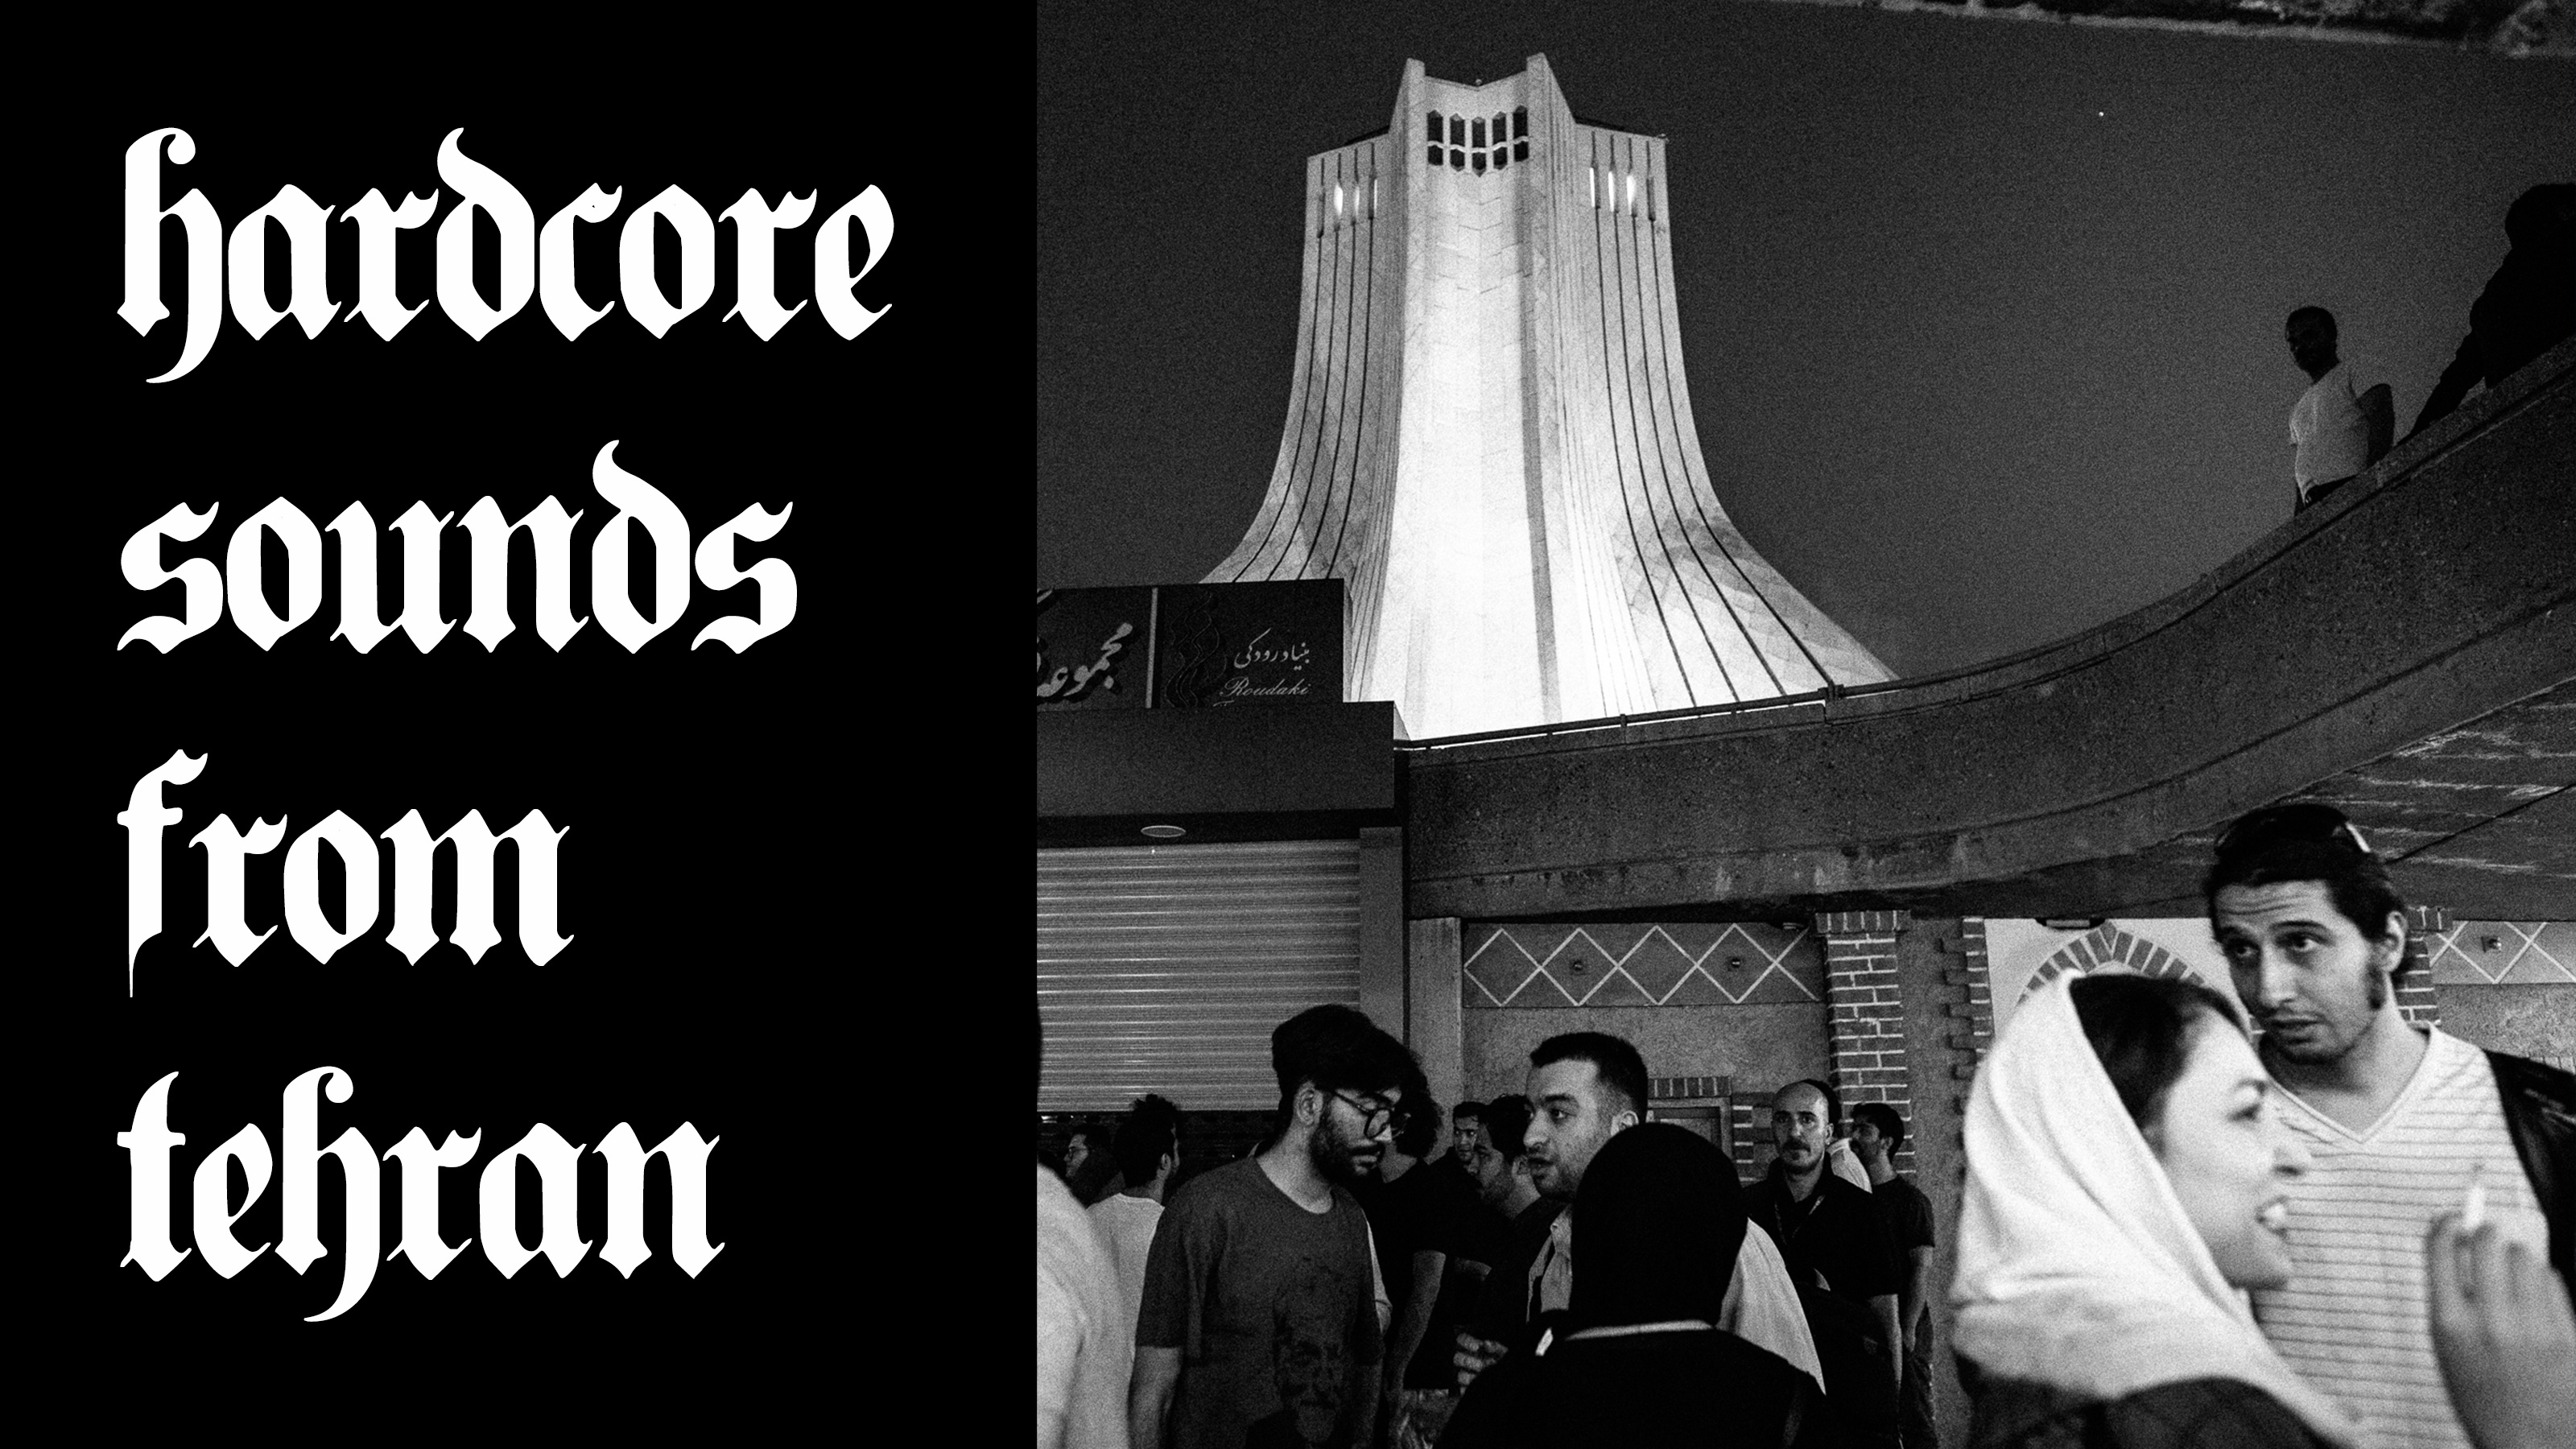 Hardcore sounds from Tehran